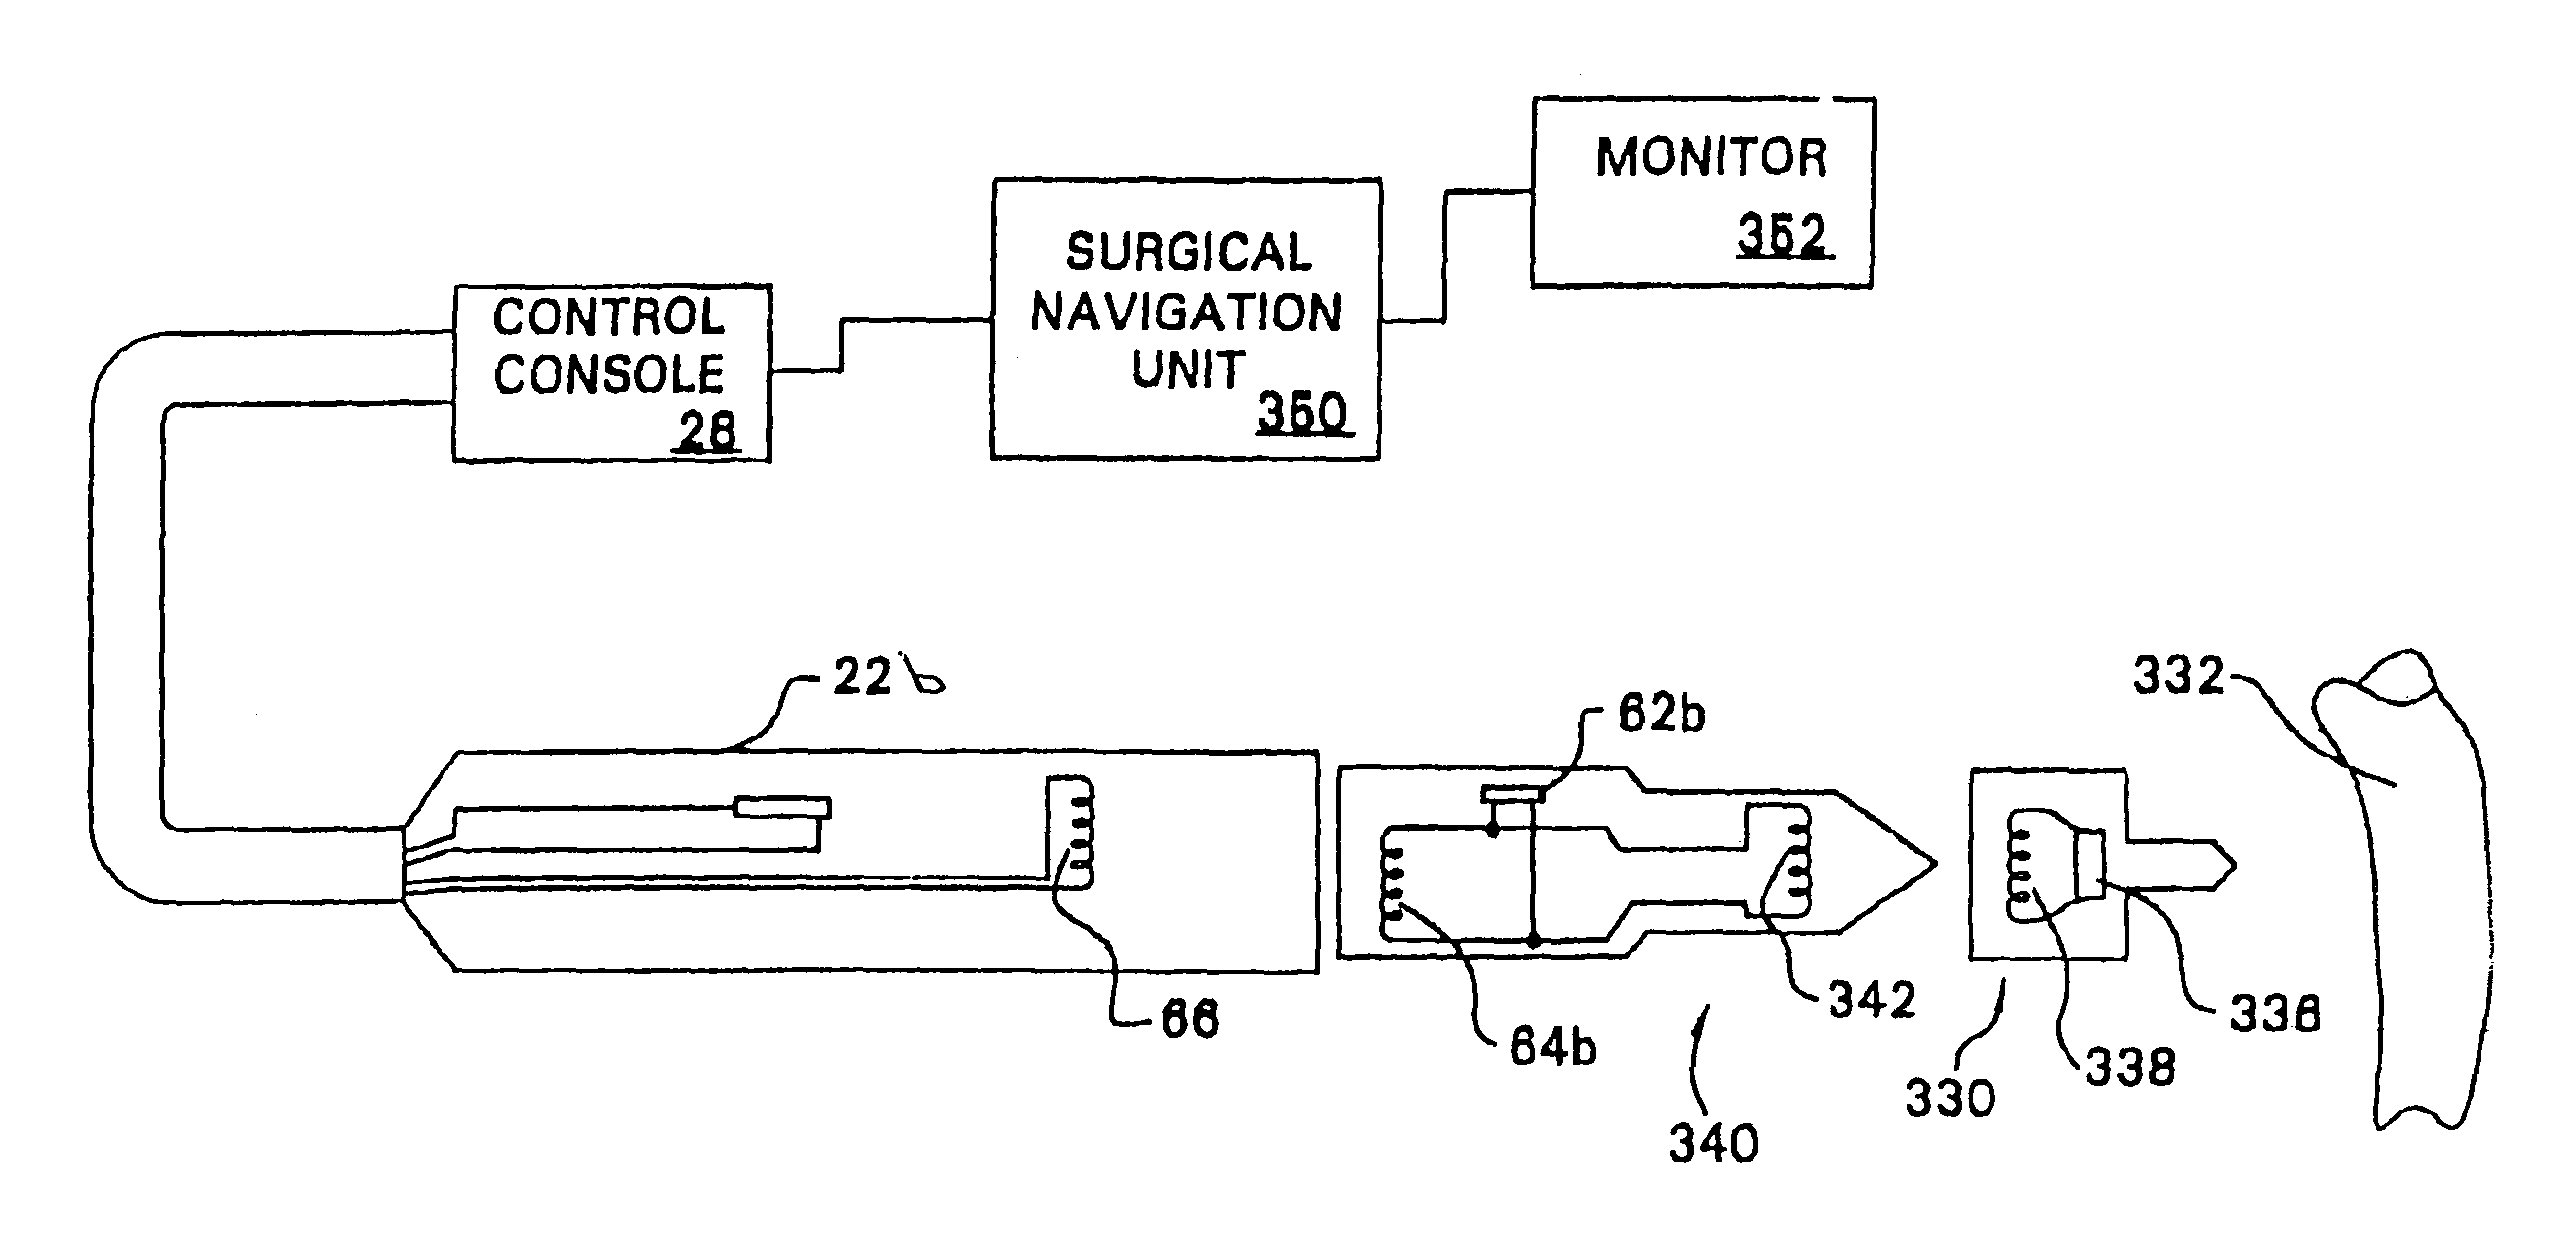 Method for assembling, identifying and controlling a powered surgical tool assembly assembled from multiple components